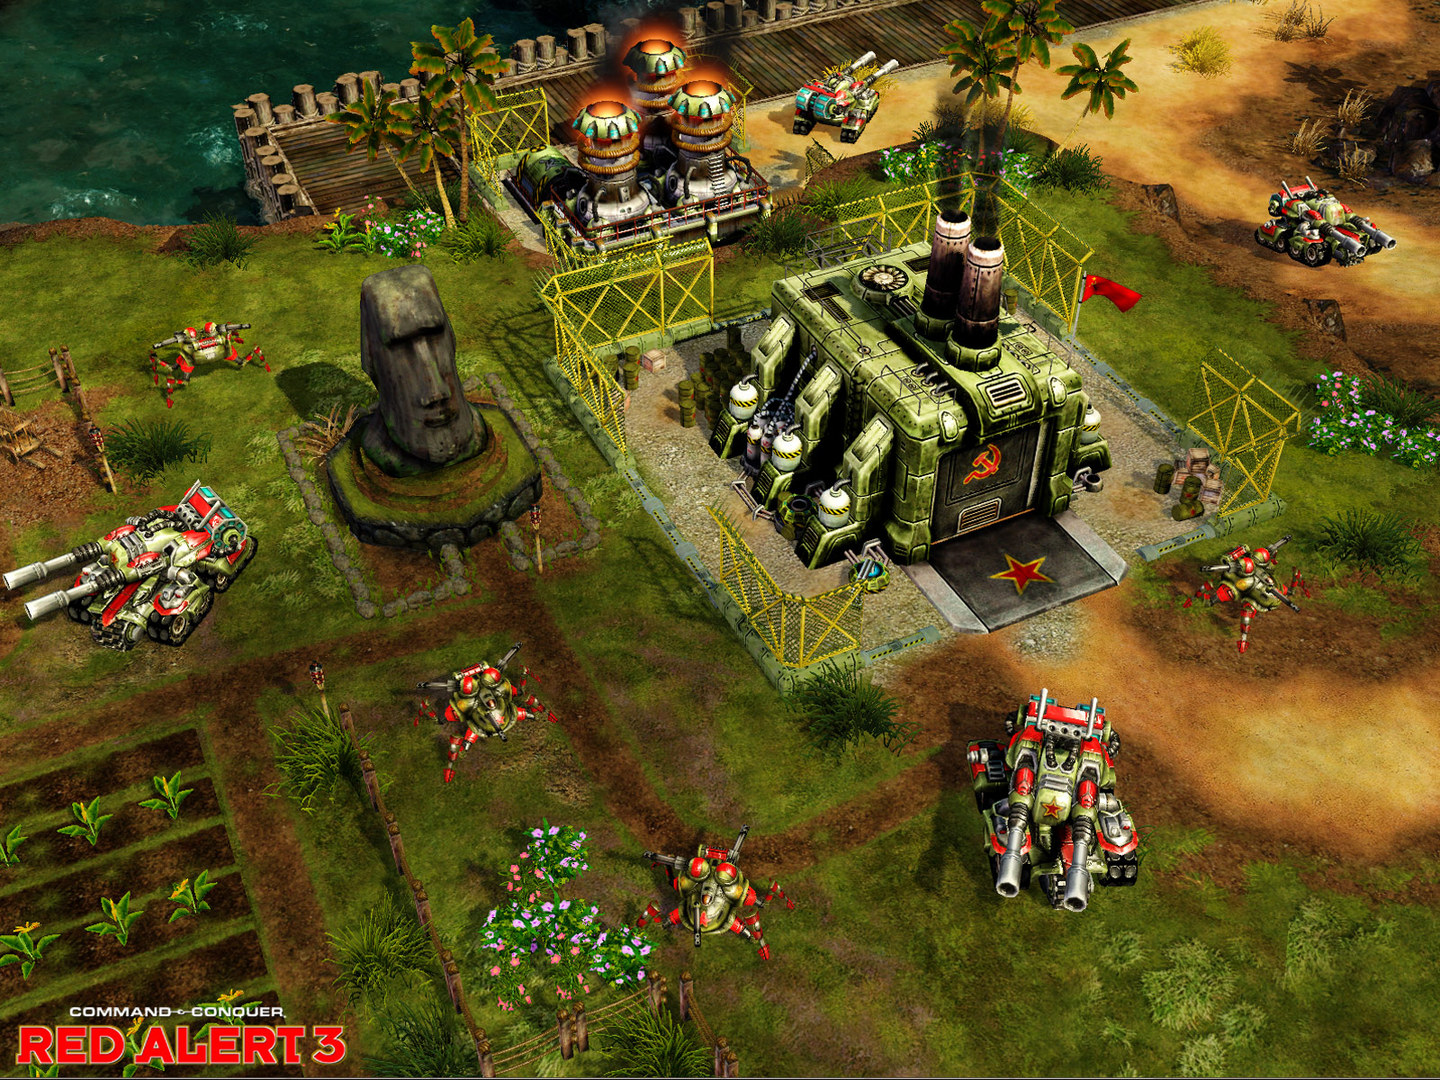 Save on Command & Conquer: Red Alert 3 on Steam